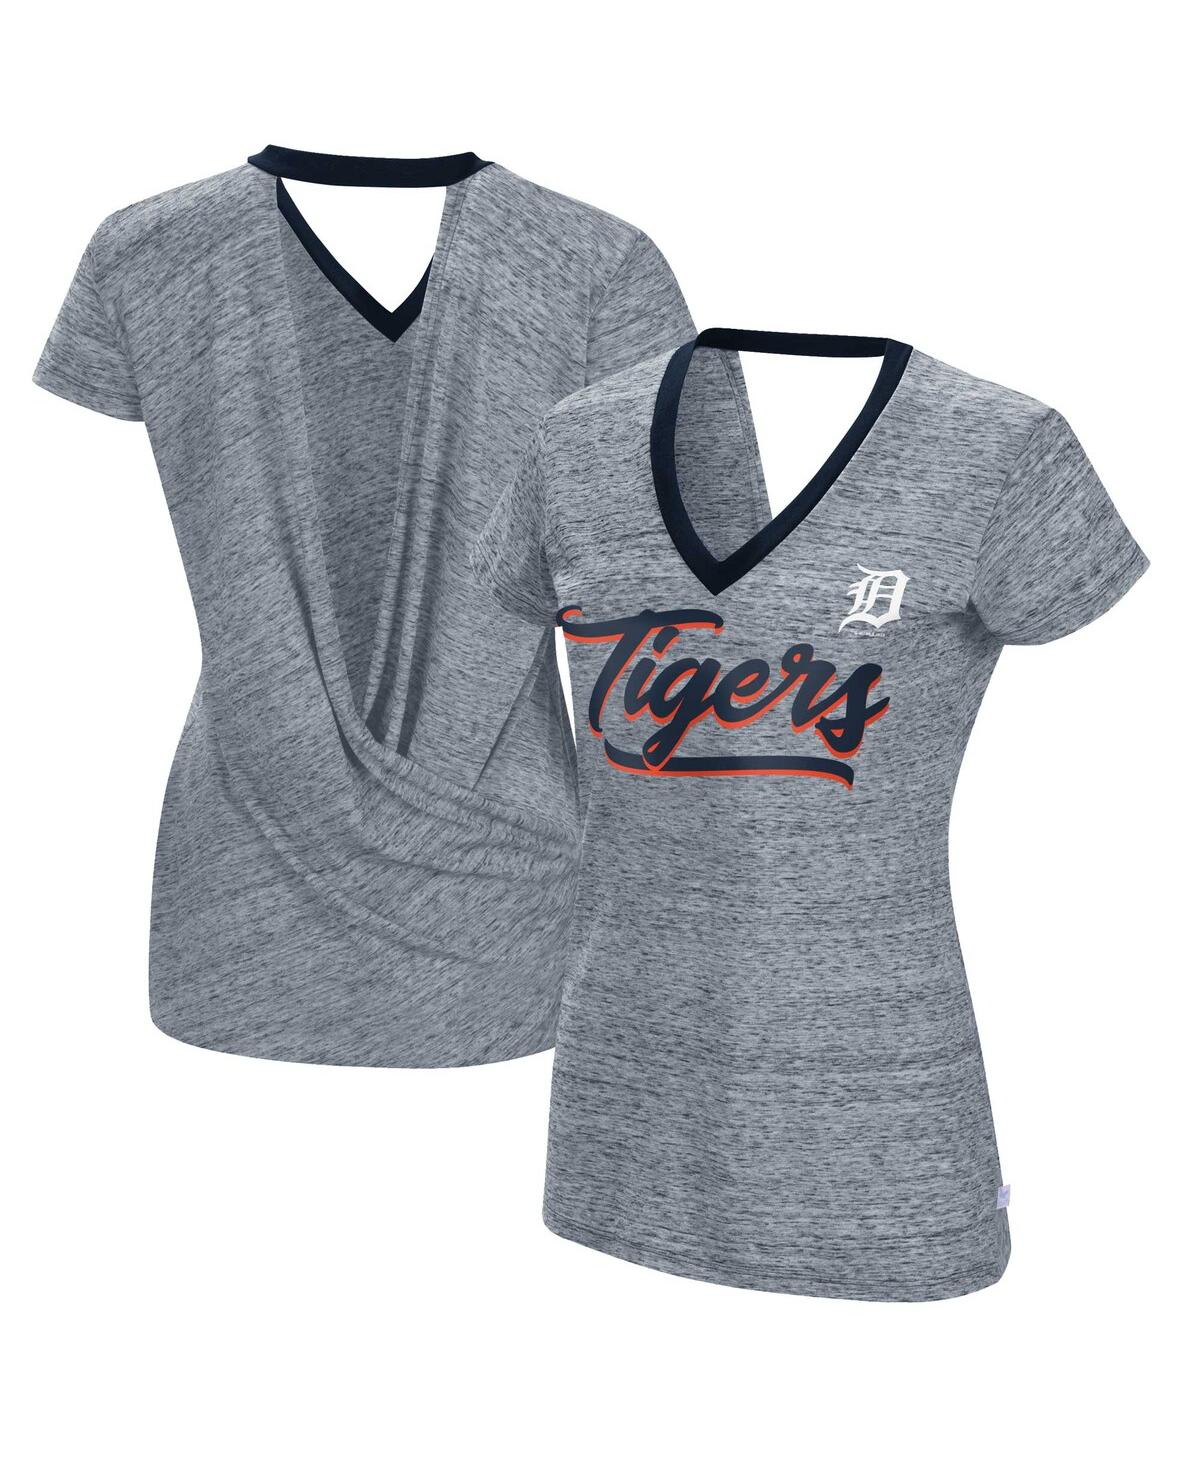 Women's Touch Navy Detroit Tigers Halftime Back Wrap Top V-Neck T-shirt - Navy